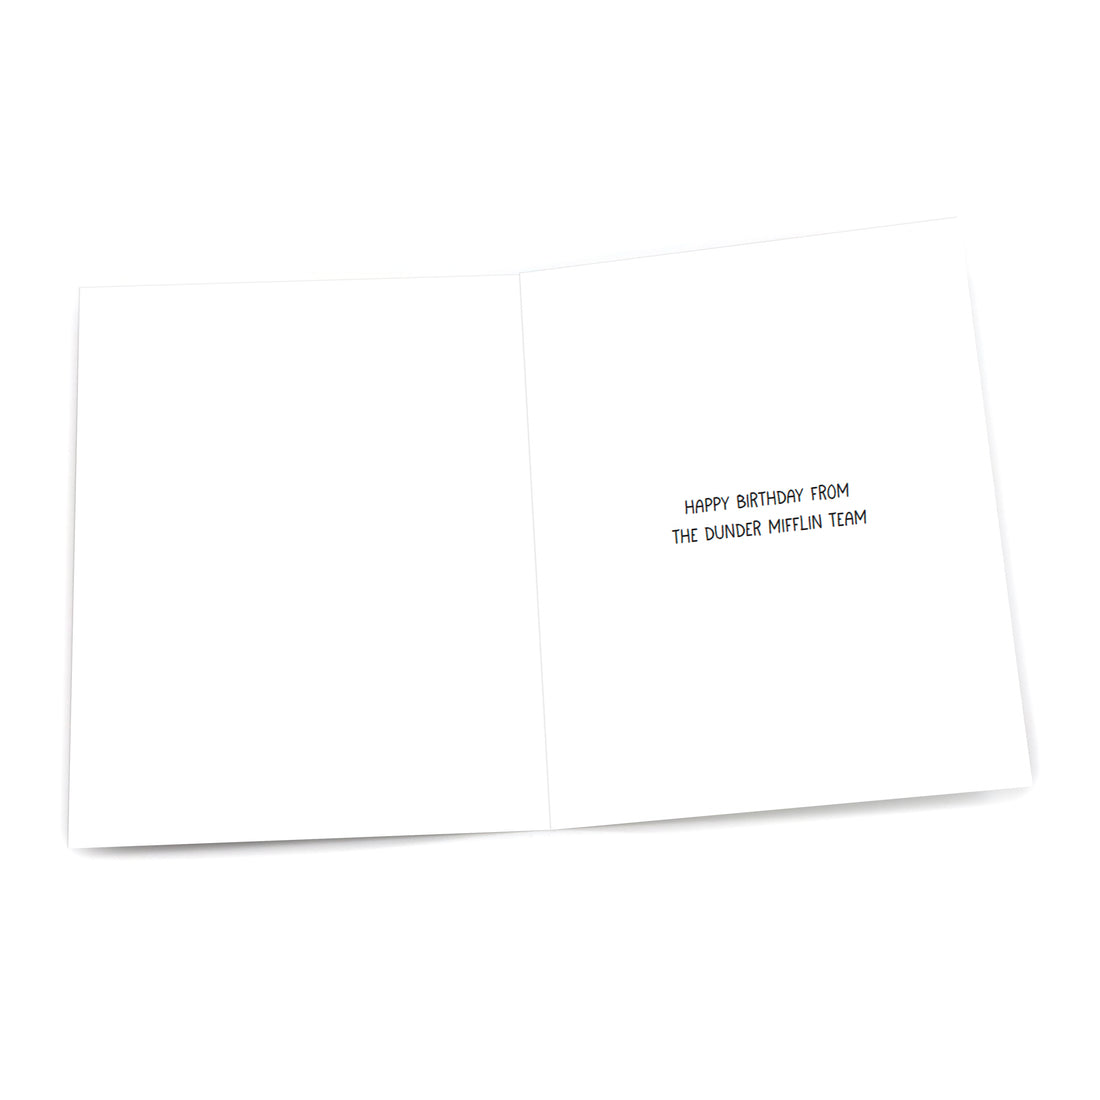 Greeting Card: The Office, Let's Hope the Only Downsizing - Pack of 6